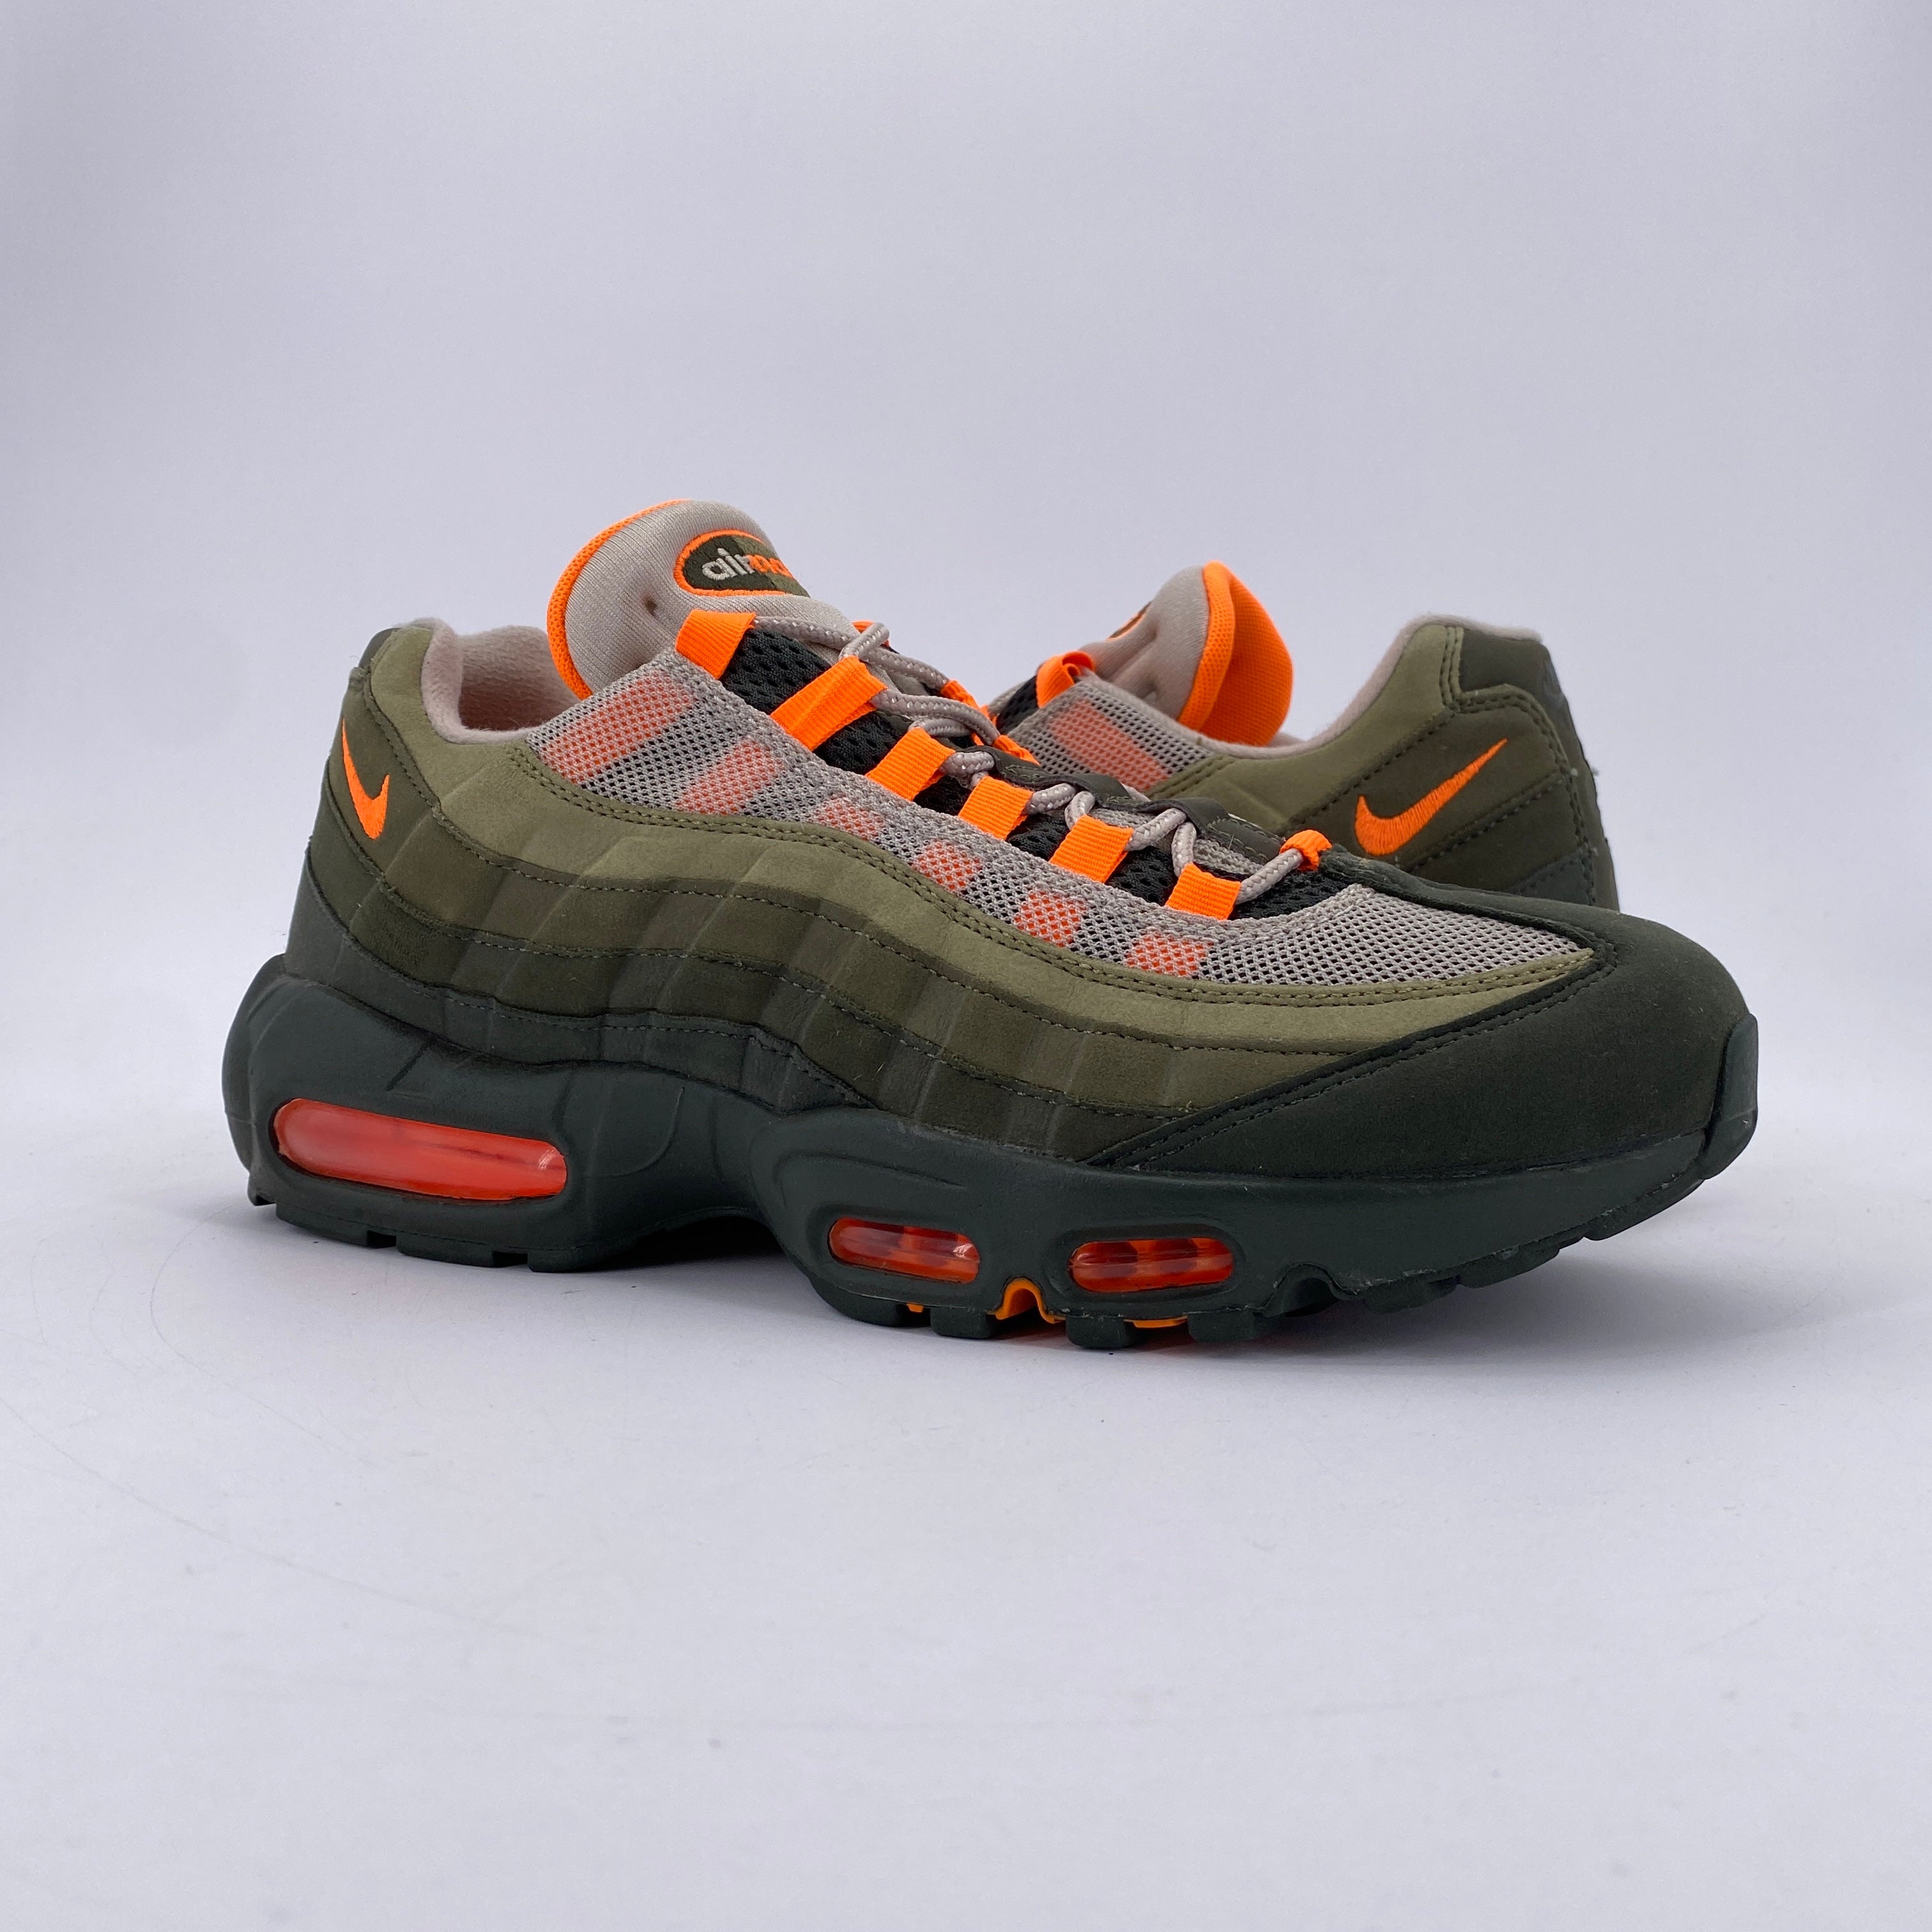 Nike Air Max 95 &quot;Olive Orange&quot; 2018 Used Size 10.5